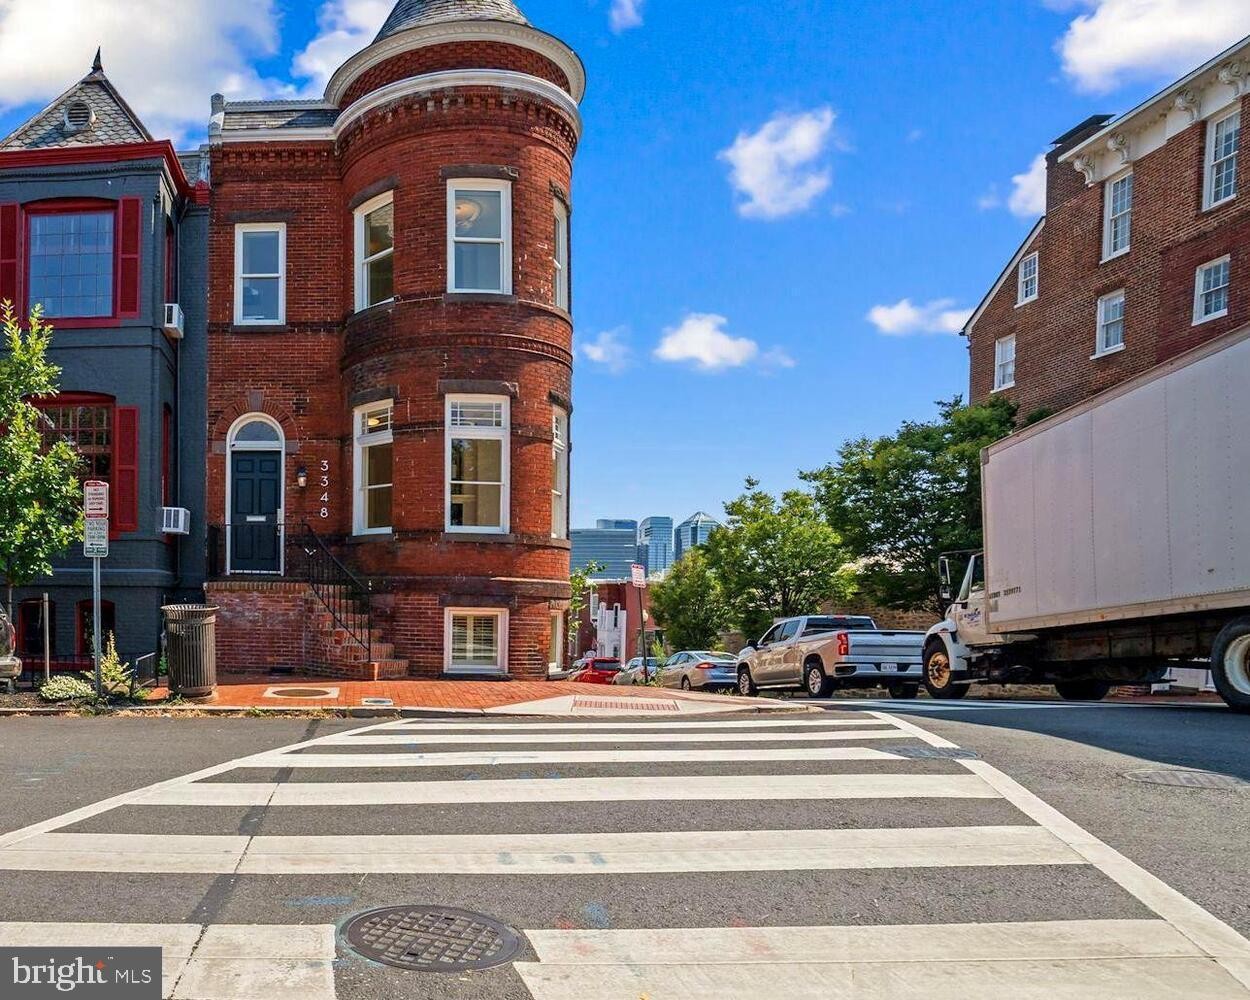 1. 48 Prospect St NW 